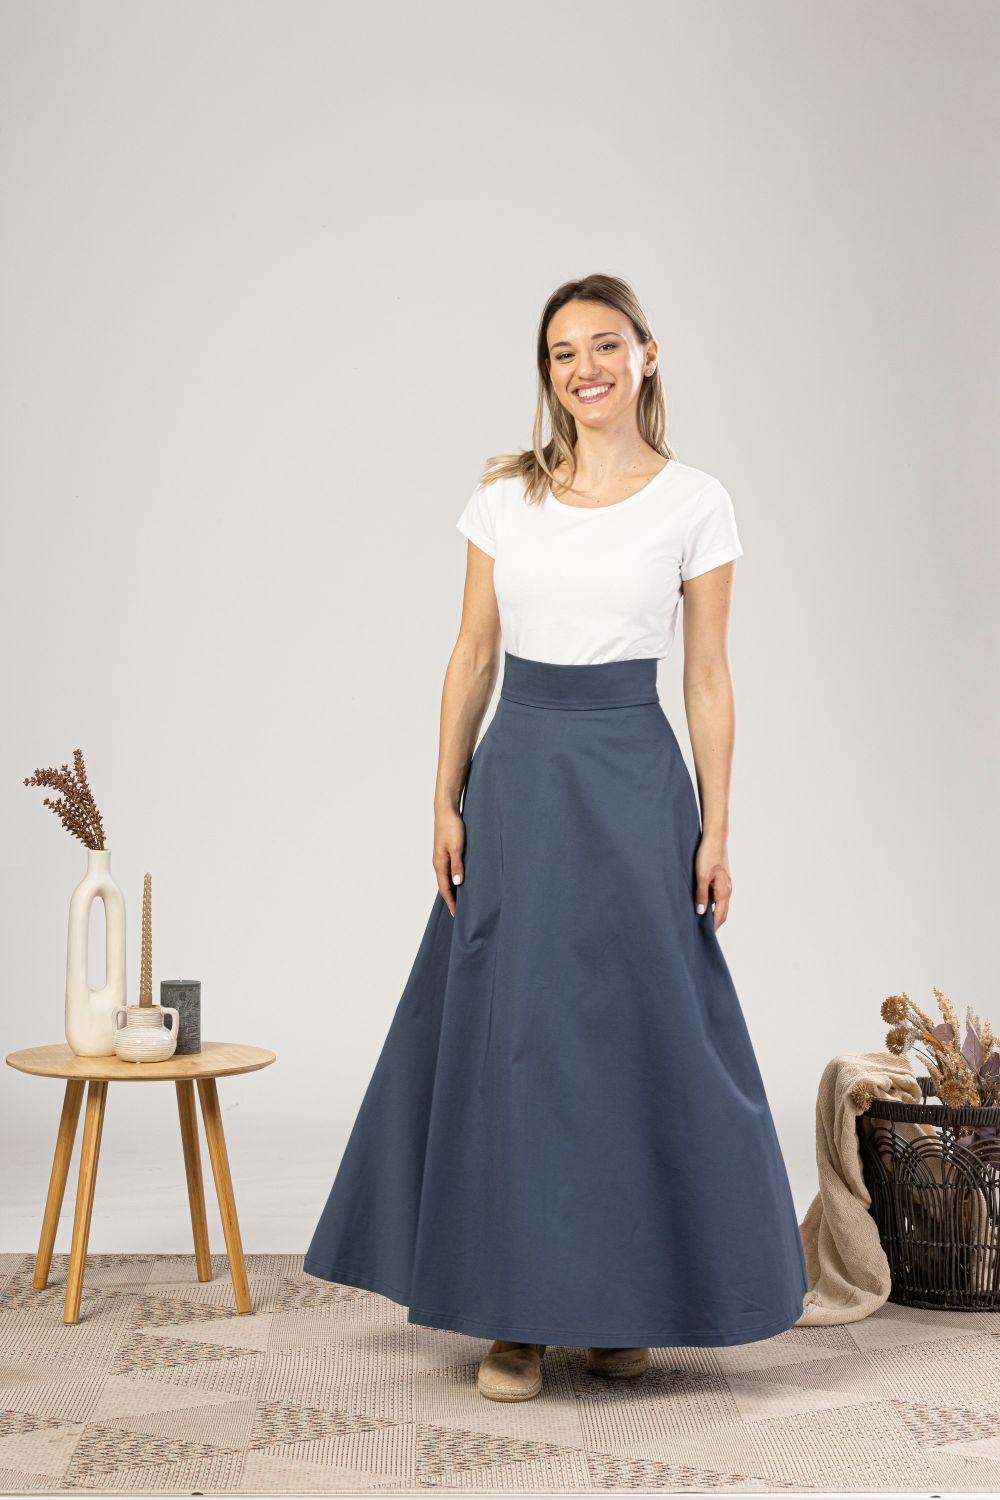 Gentle Bell-Shaped Summer Skirt for formal and casual outfits - from NikkaPlace | Effortless fashion for easy living